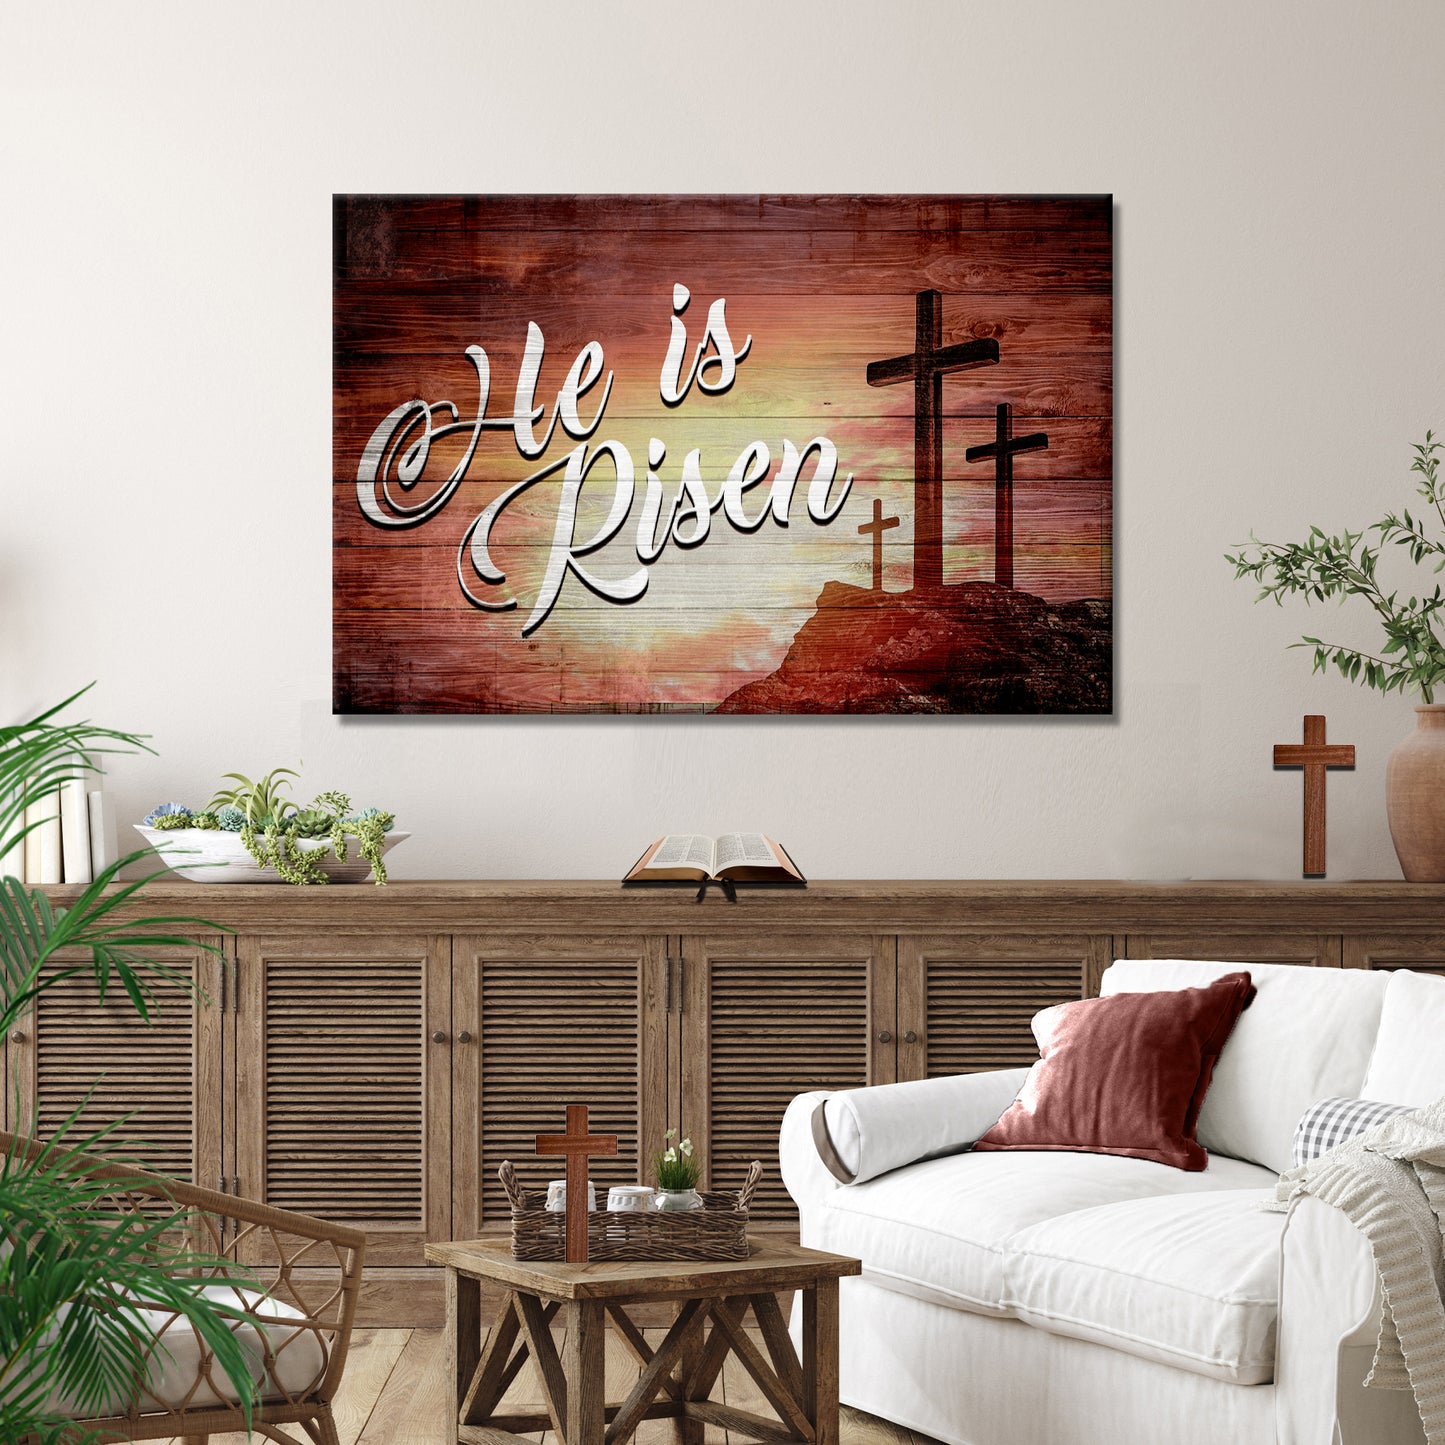 He Is Risen Sign- Image by Tailored Canvases